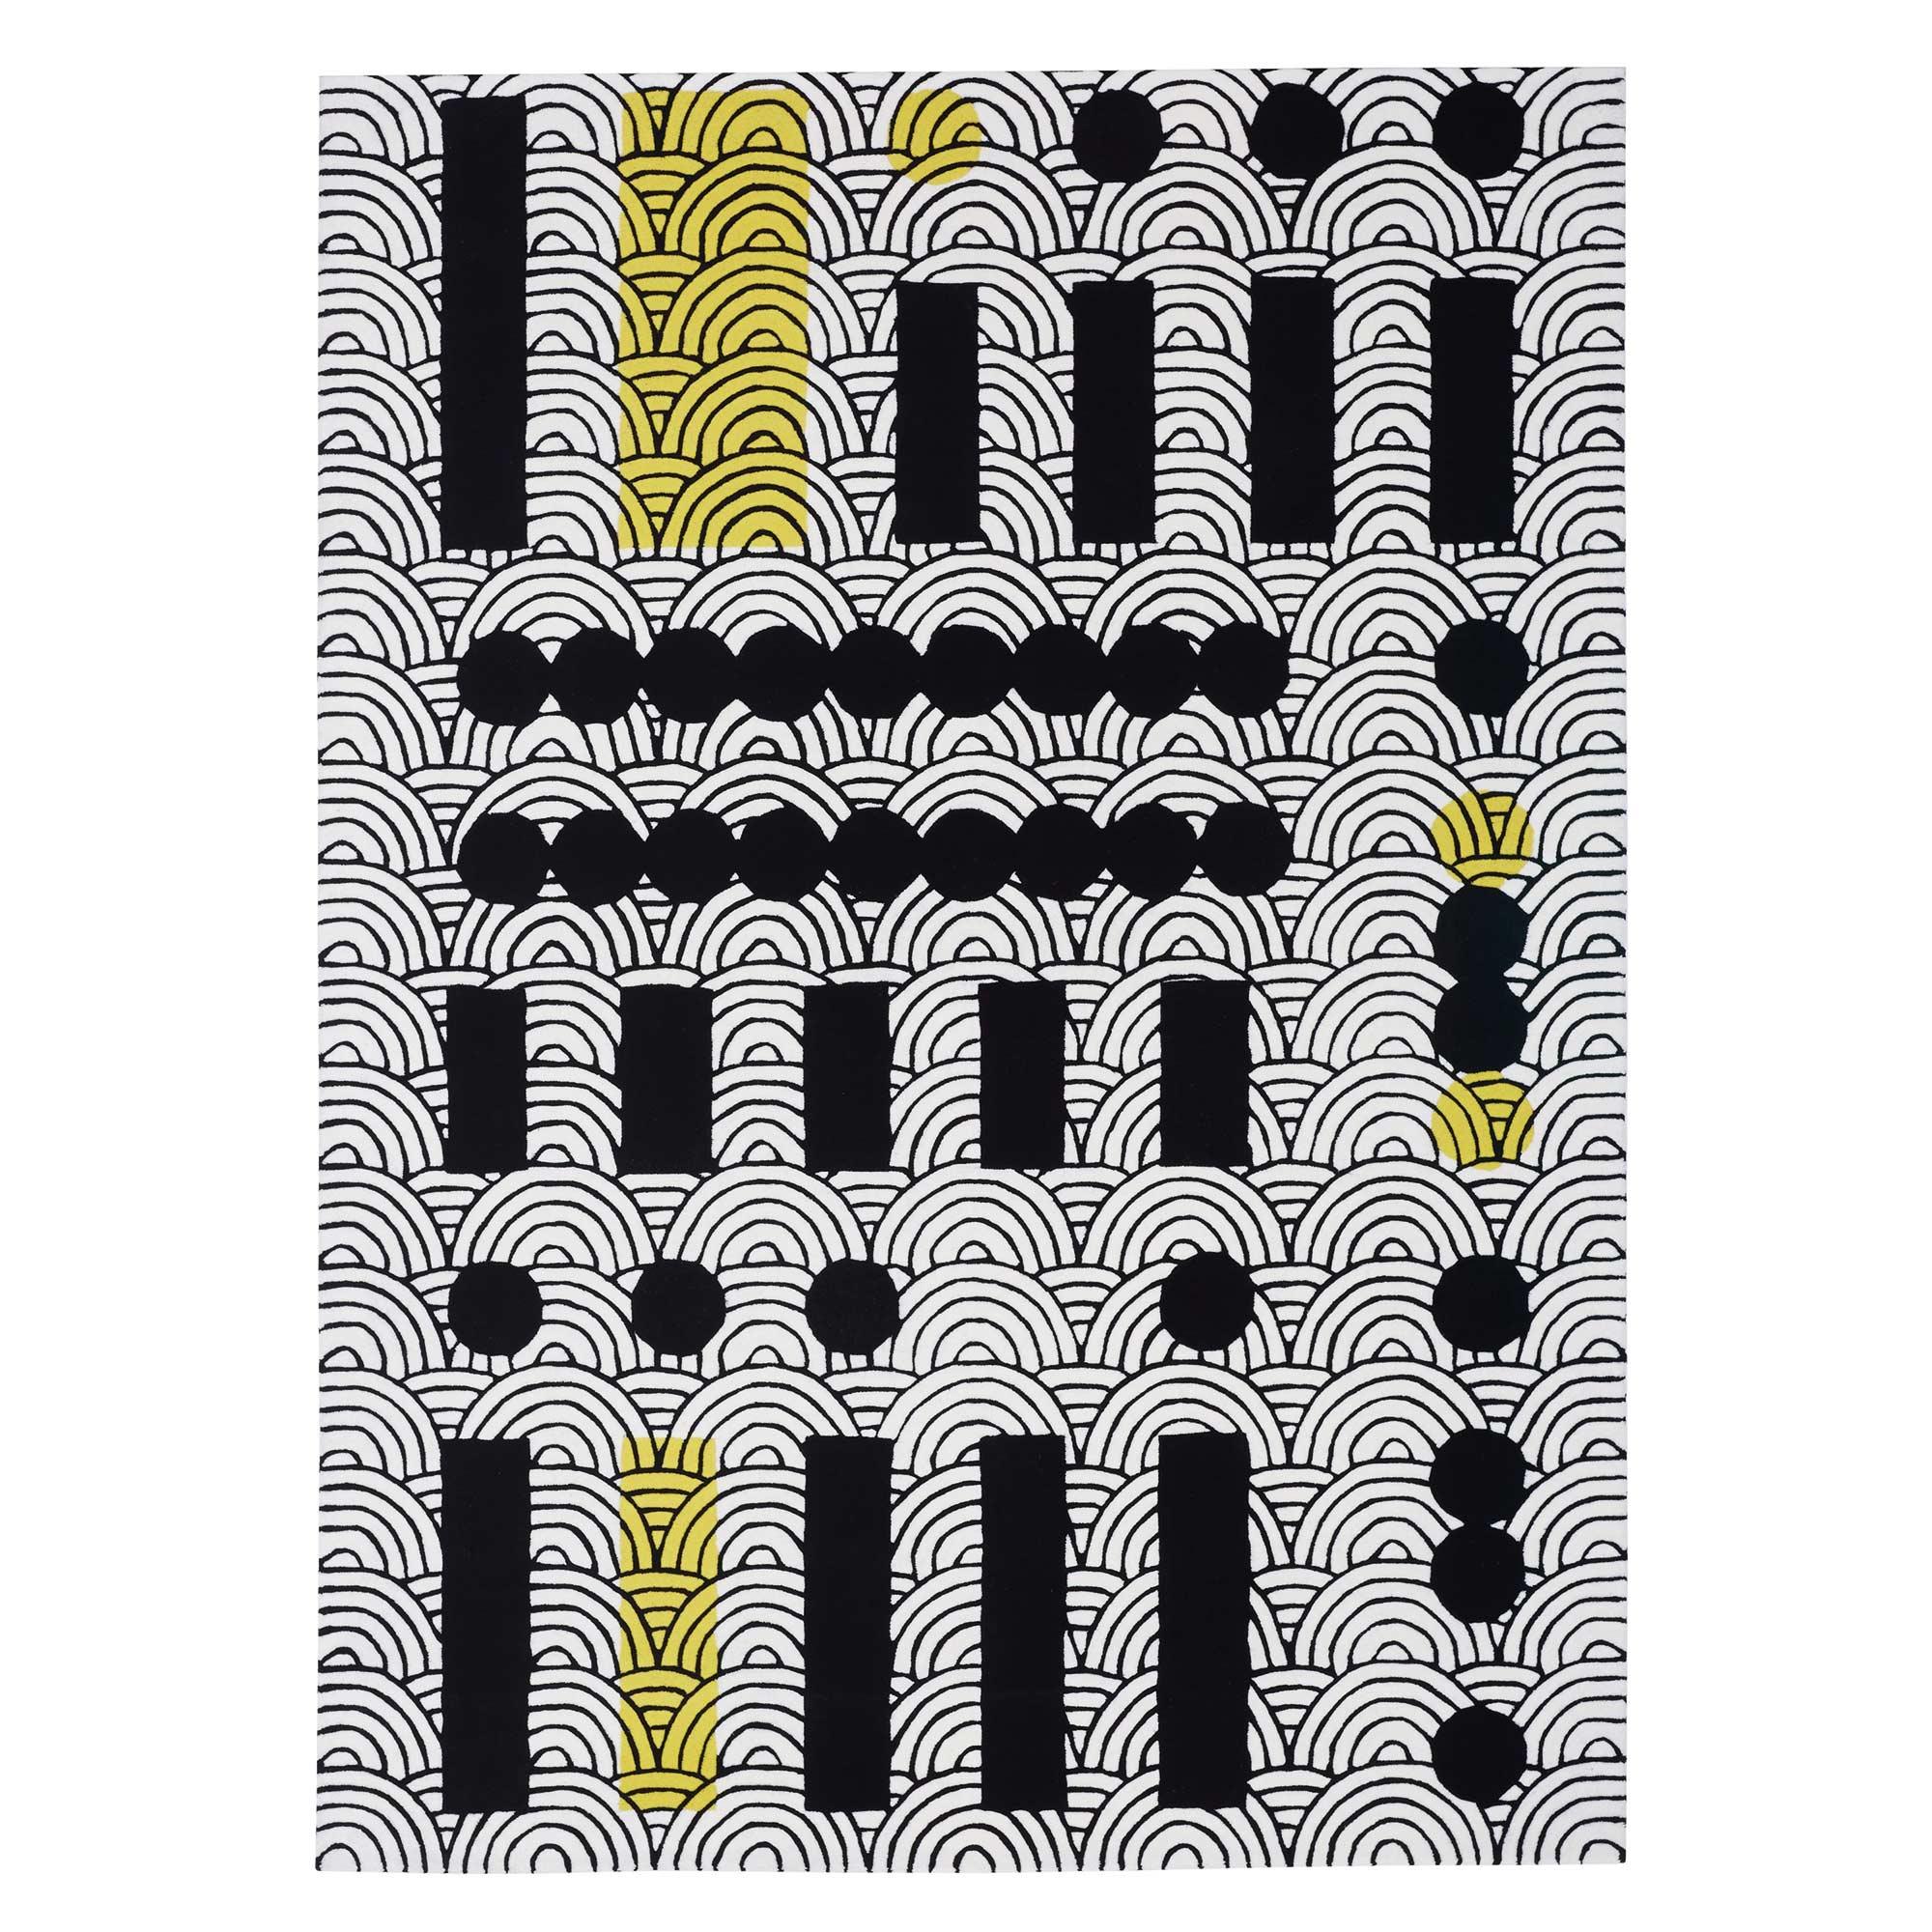 Japanese Abstractions N°2 Rug by Thomas Dariel 
Dimensions: D 240 x W 170 cm 
Materials: New Zealand Wool and Viscose. 
Also available in other colors, designs, and dimensions. 


Japanese Abstractions is a collection of nine pieces, all